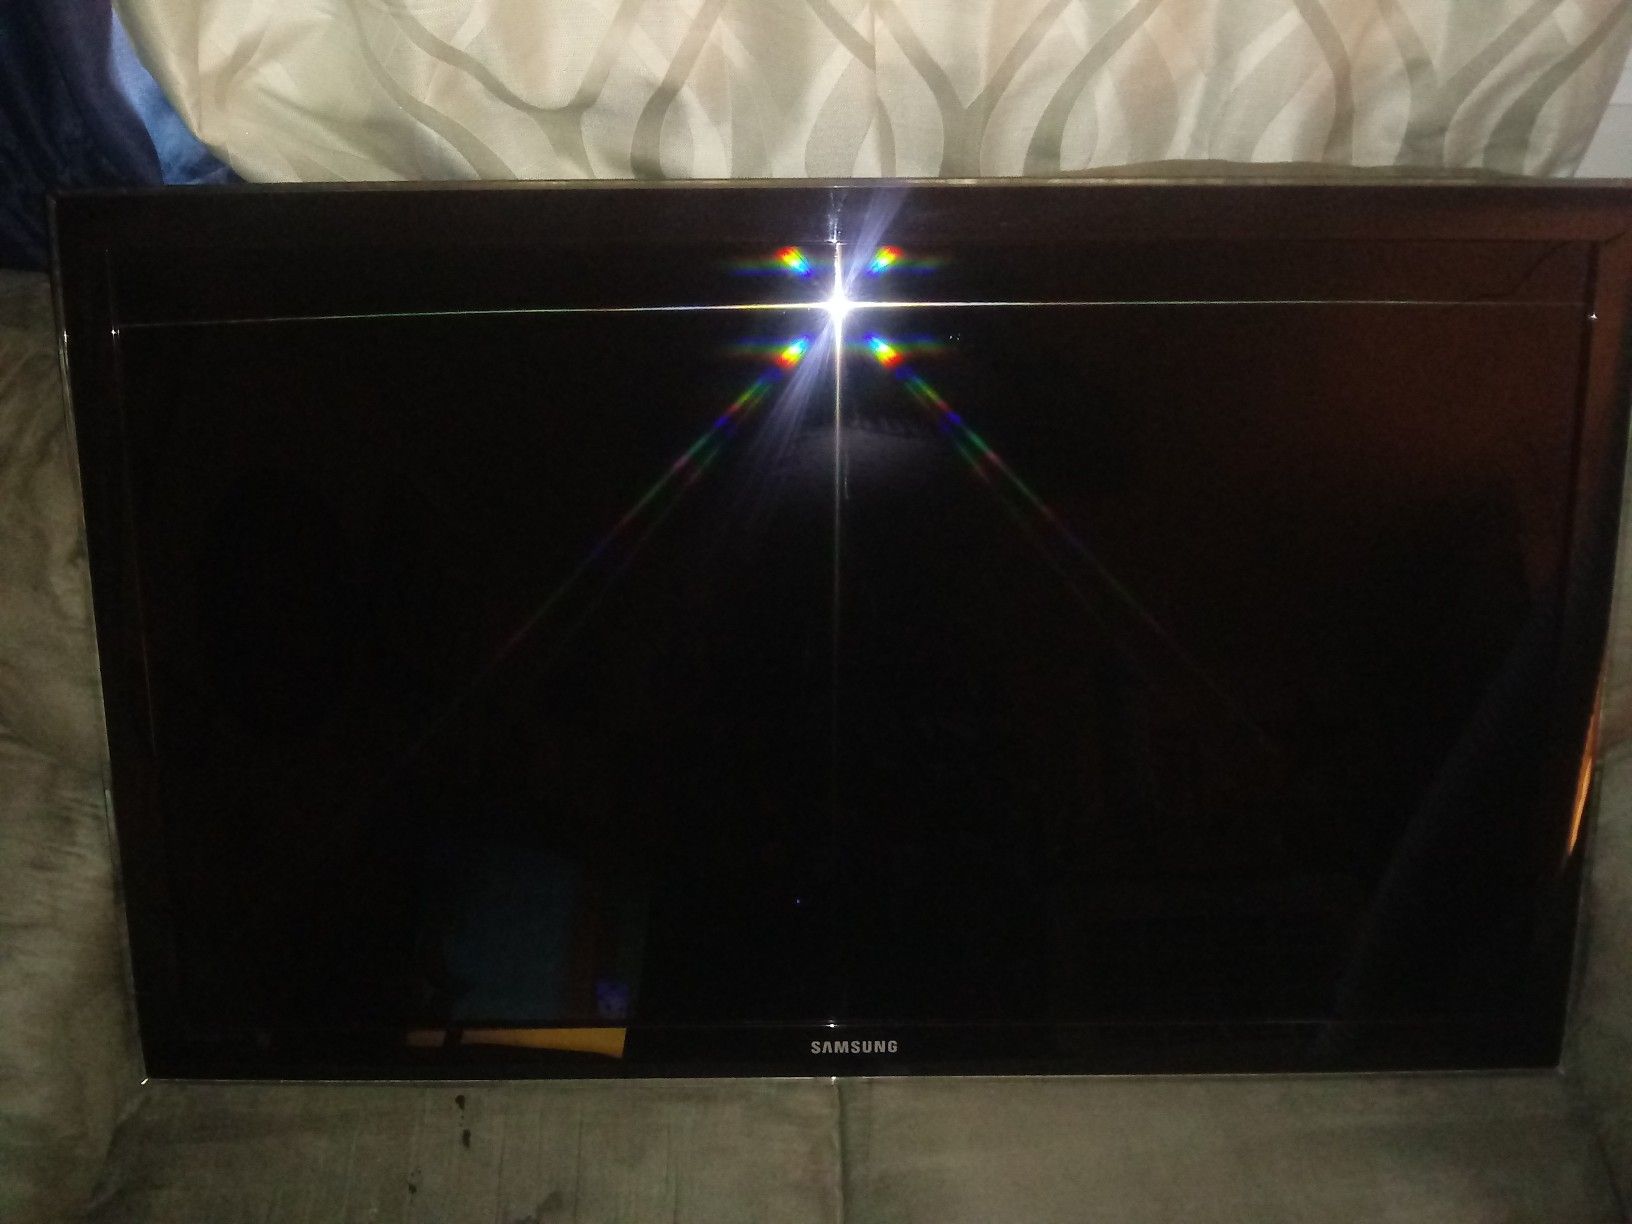 Samsung slim 55 inch tv. Don't message me unless you are a serious buyer